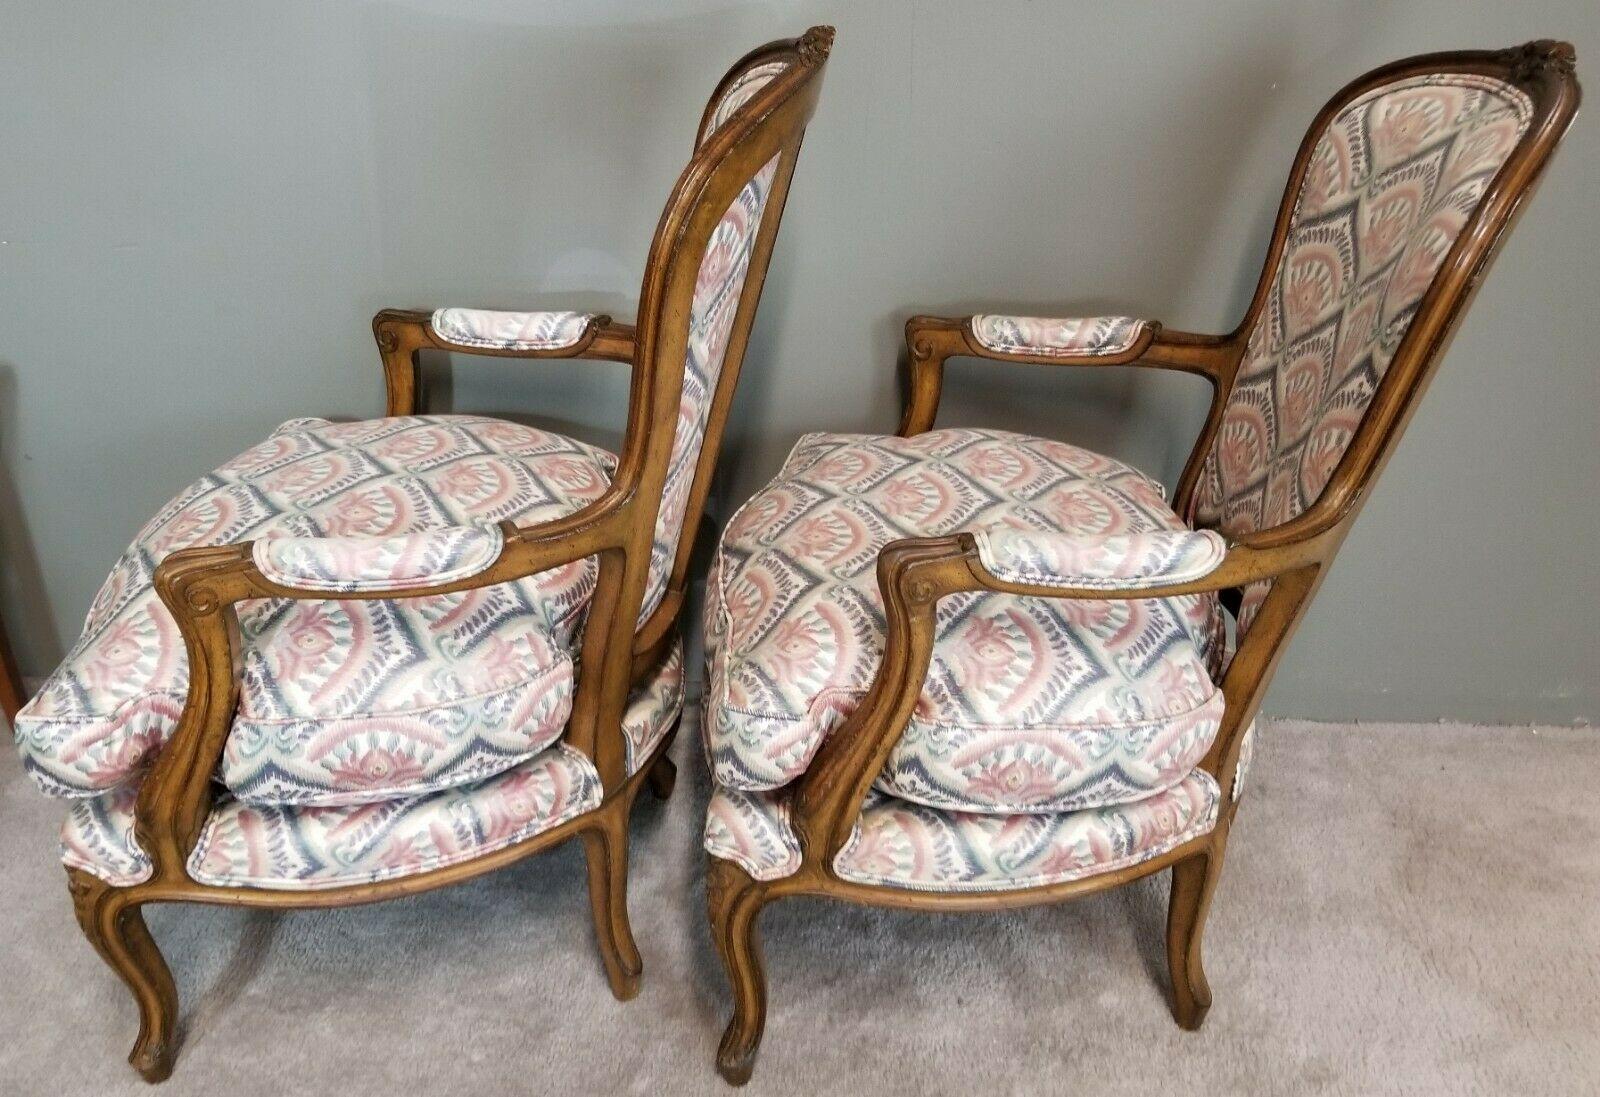 French Provincial Louis XV Down Cushions Fauteuil Armchairs - Set of 2 In Good Condition For Sale In Lake Worth, FL